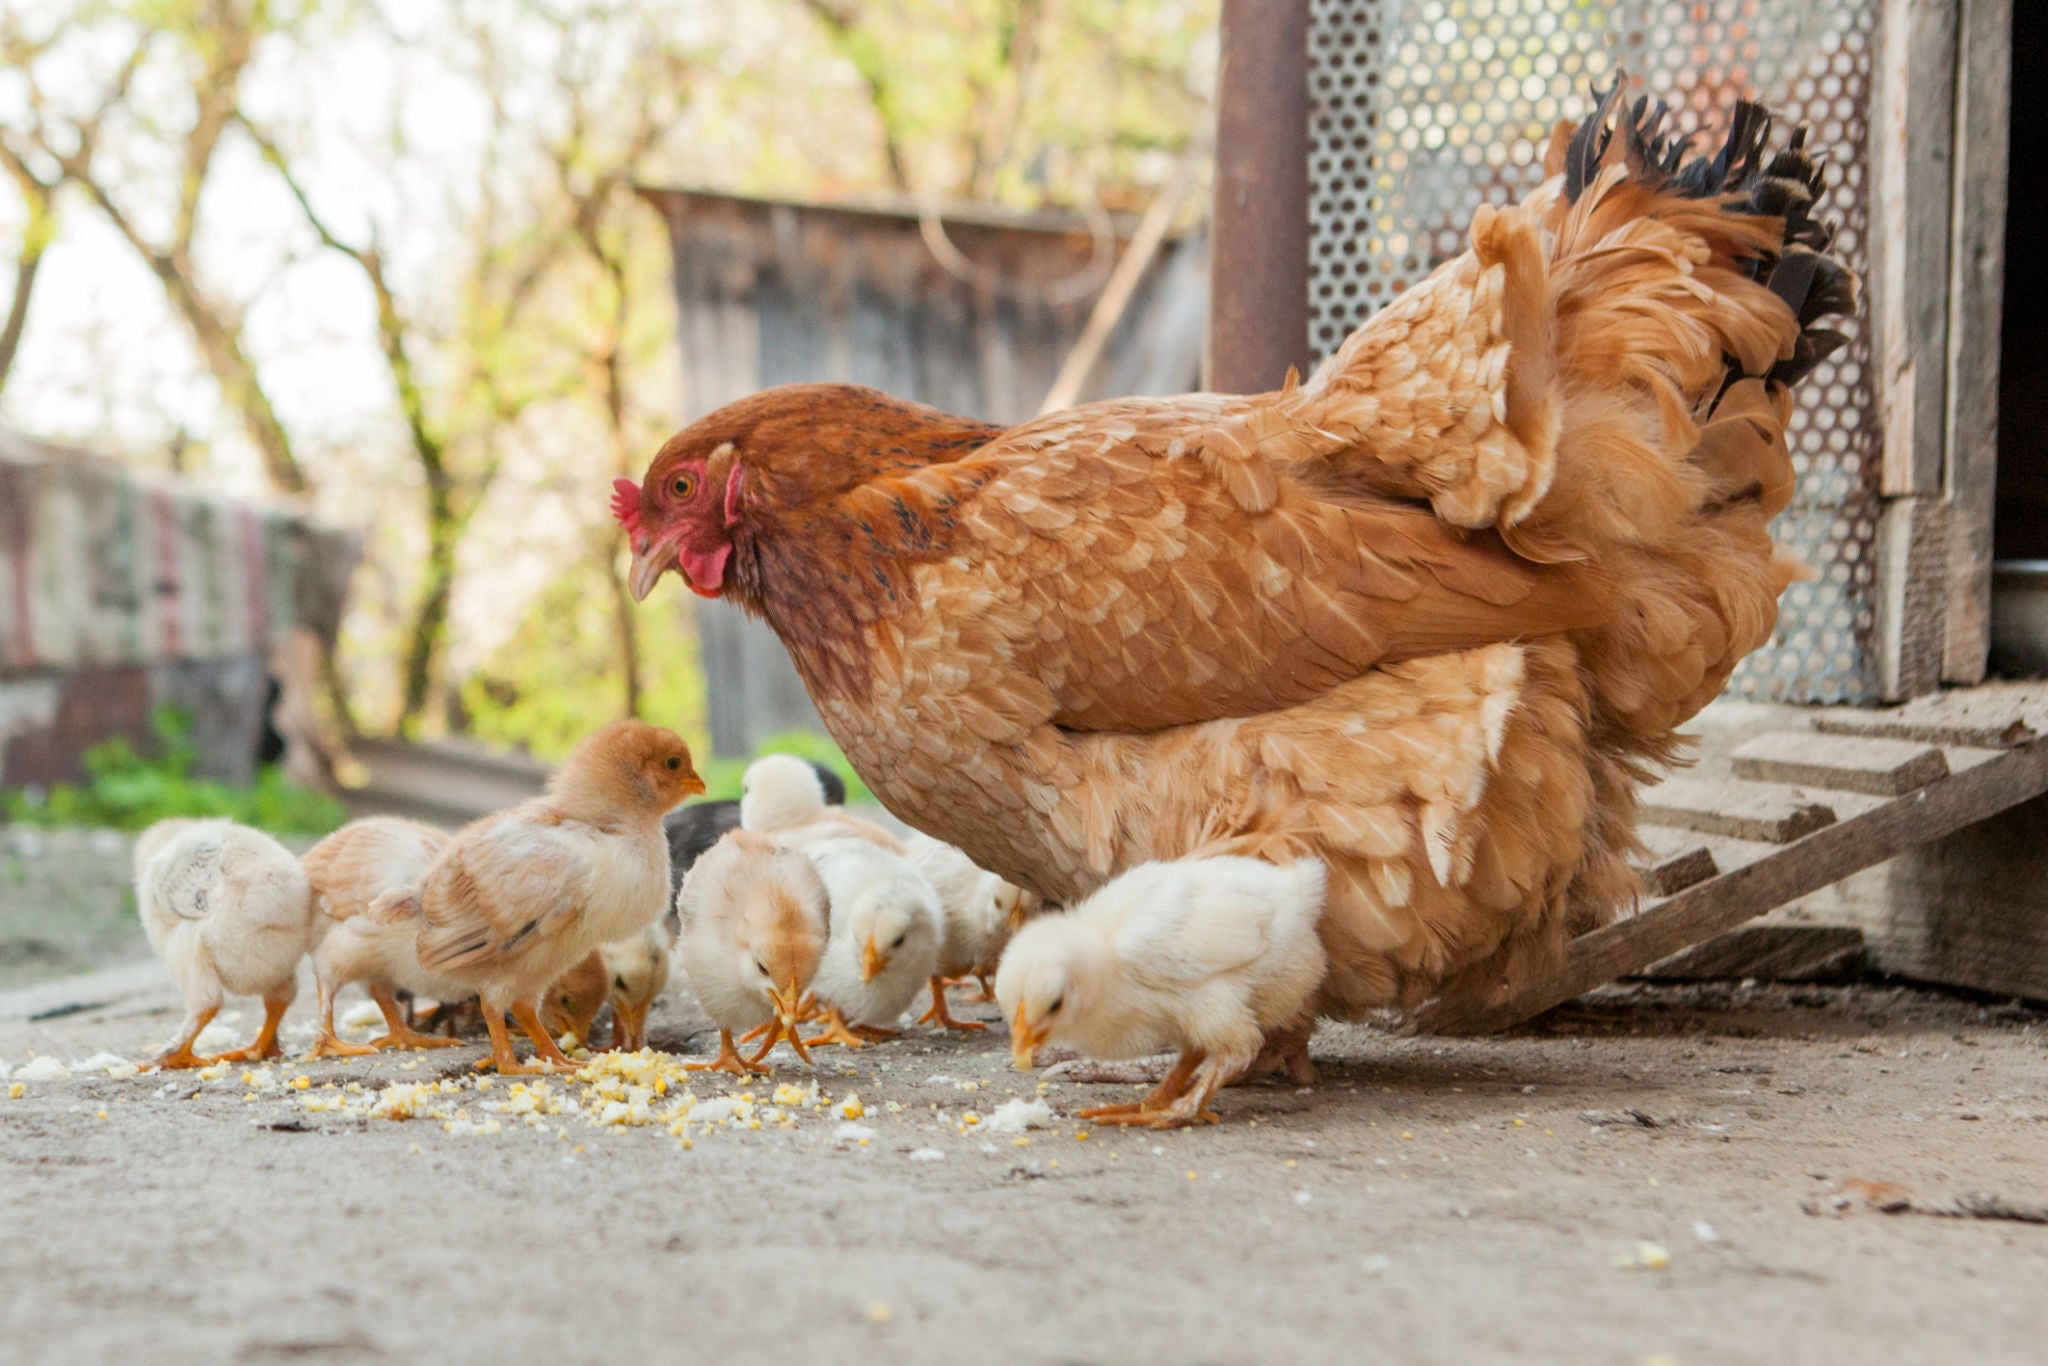 What makes chickens excellent pets?